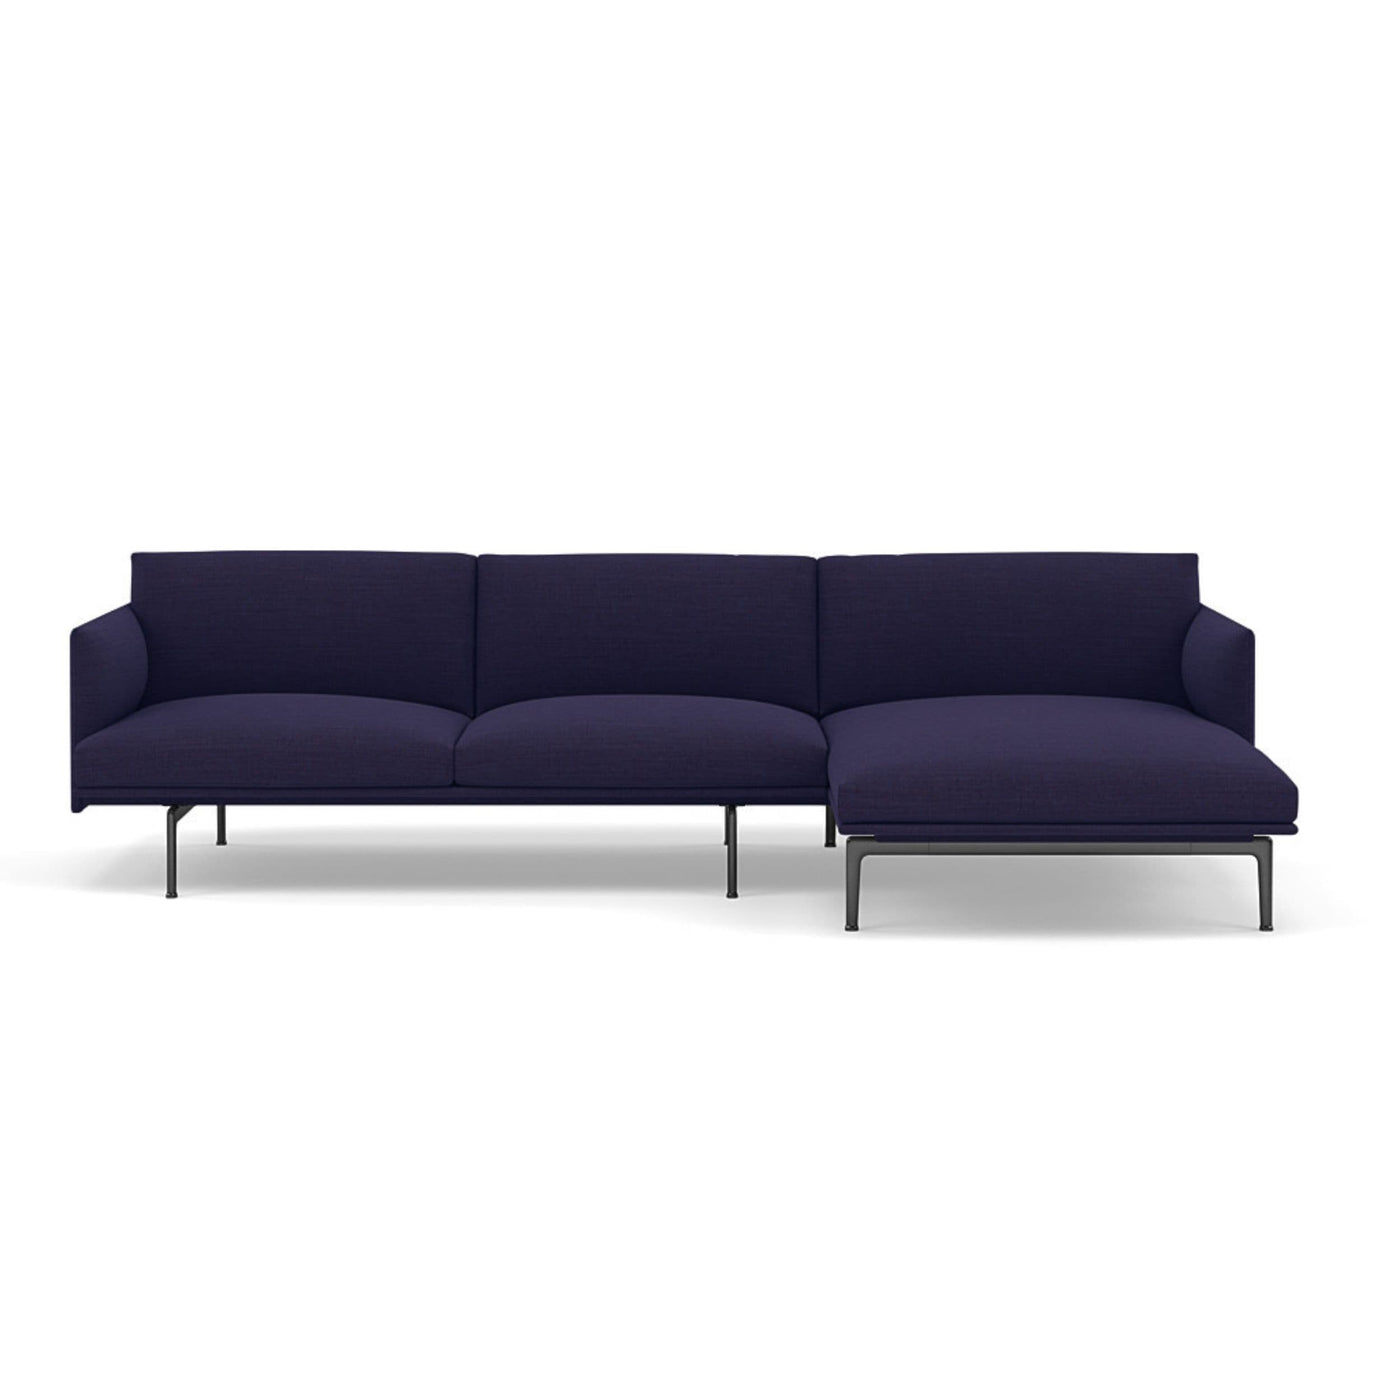 Muuto Outline Chaise Longue sofa in canvas 684. Made to order from someday designs.  #colour_canvas-684-blue